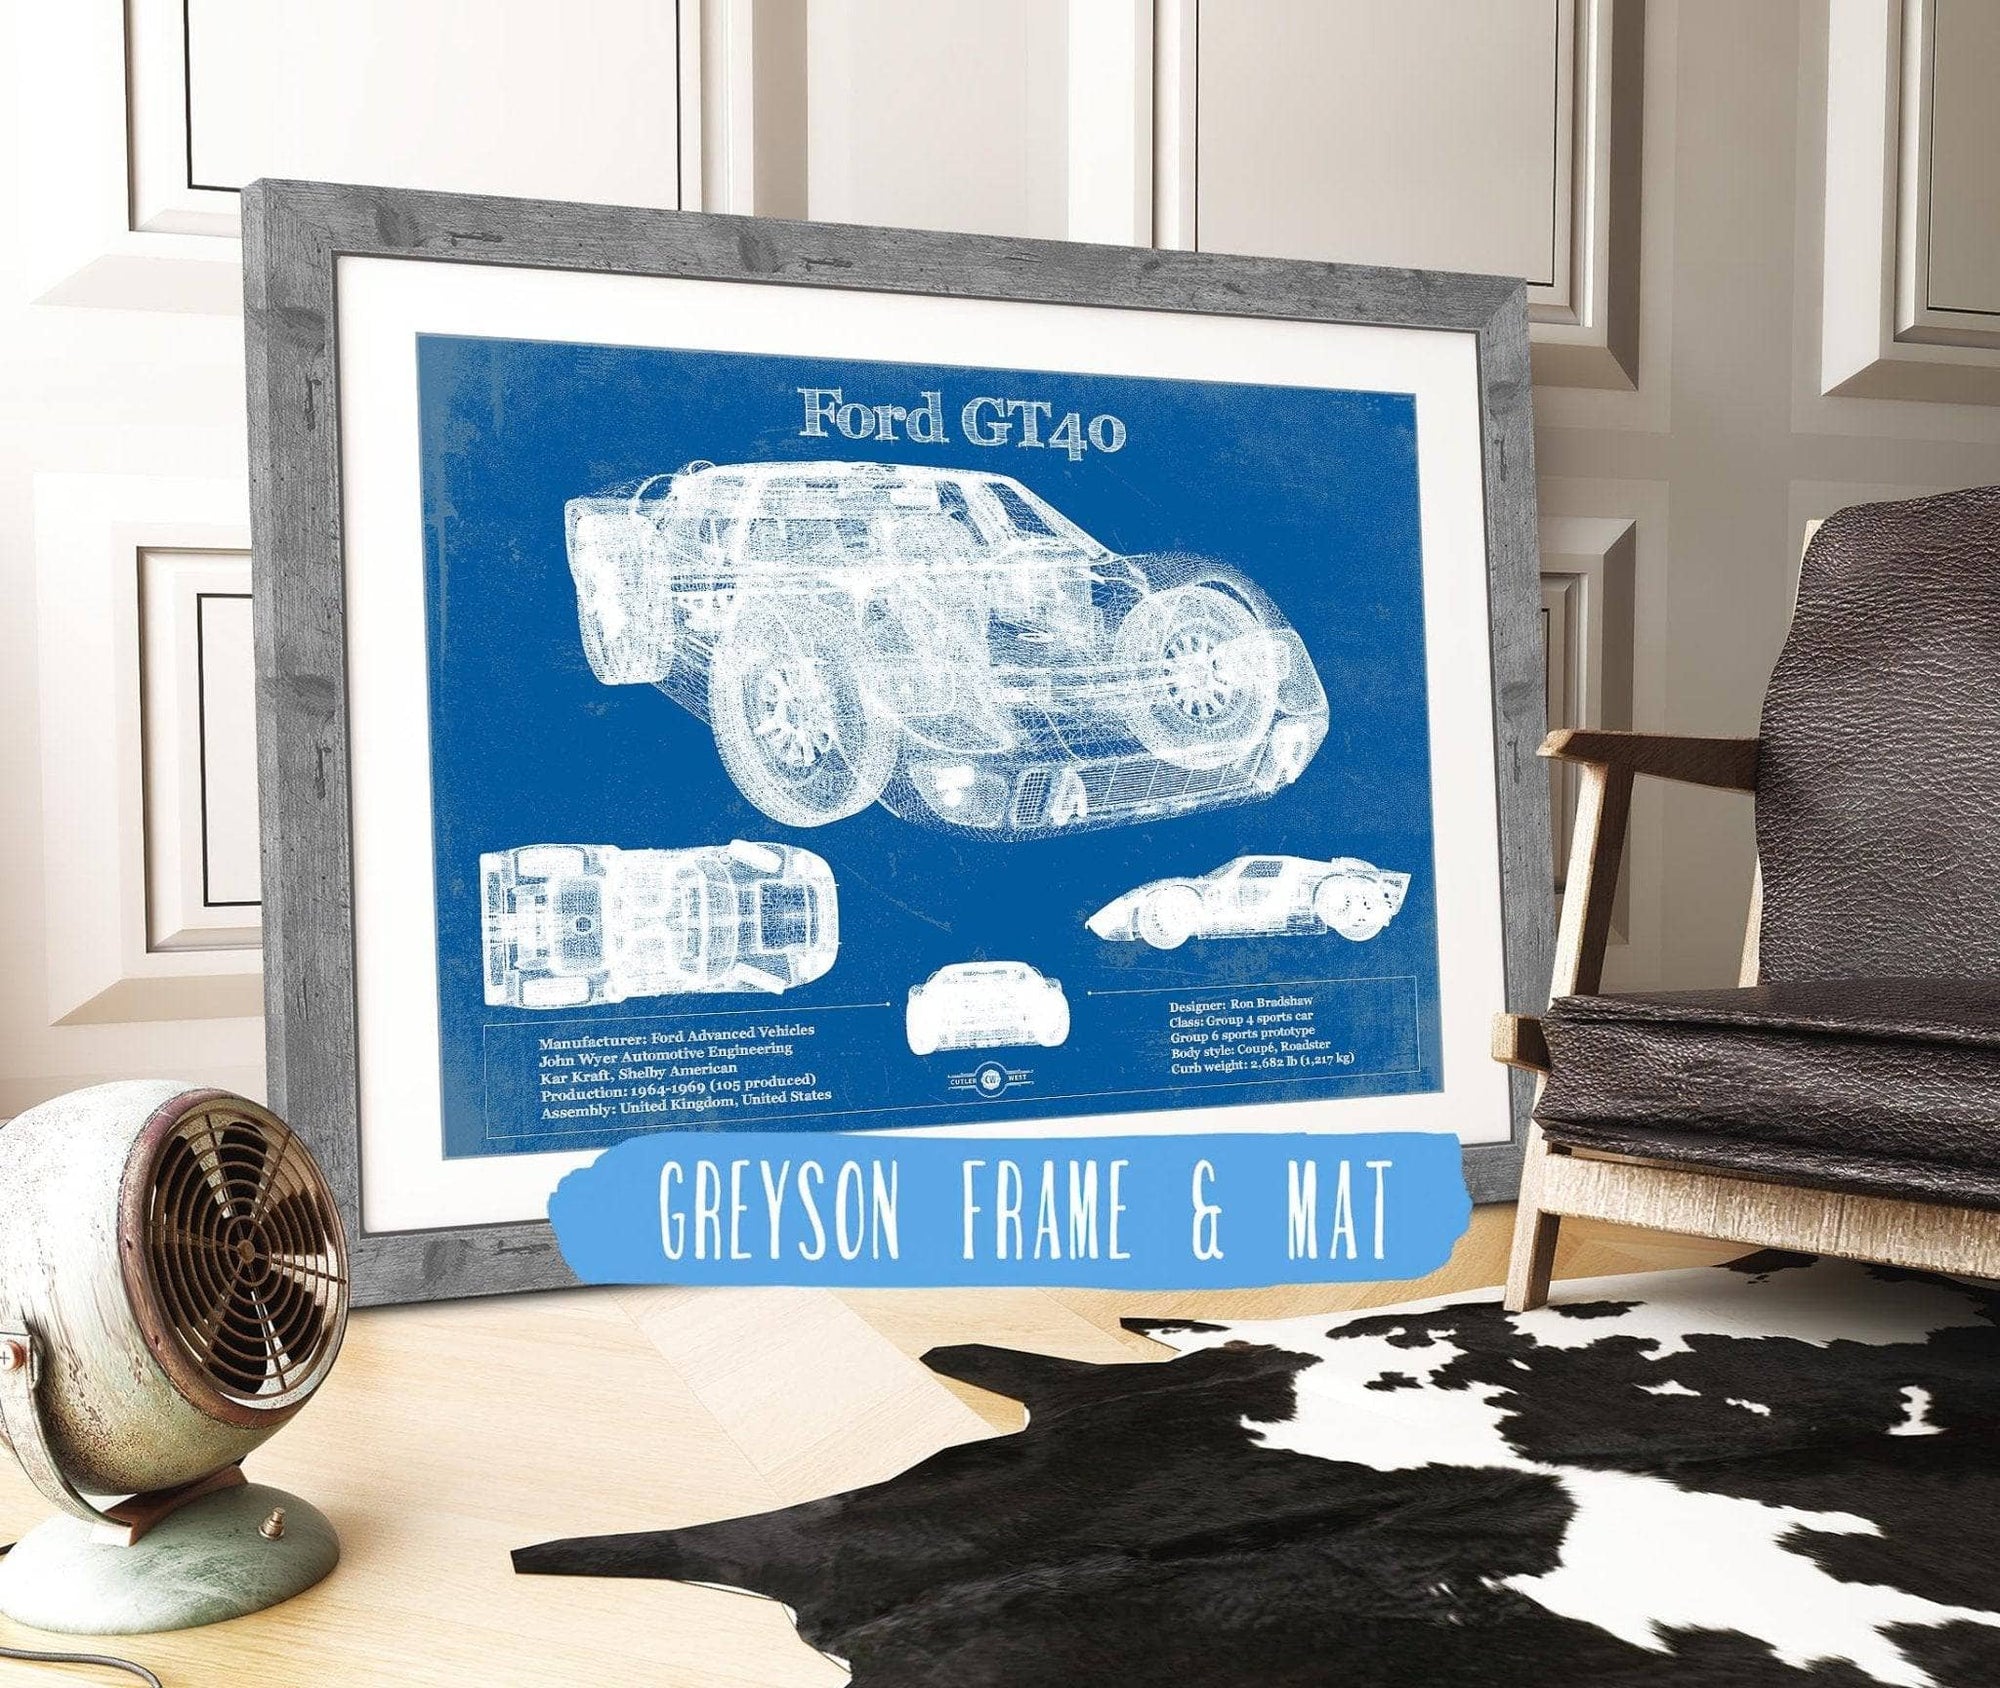 Cutler West Ford Collection 14" x 11" / Greyson Frame & Mat Ford GT40 Blueprint Vintage Auto Print 933350036_18072